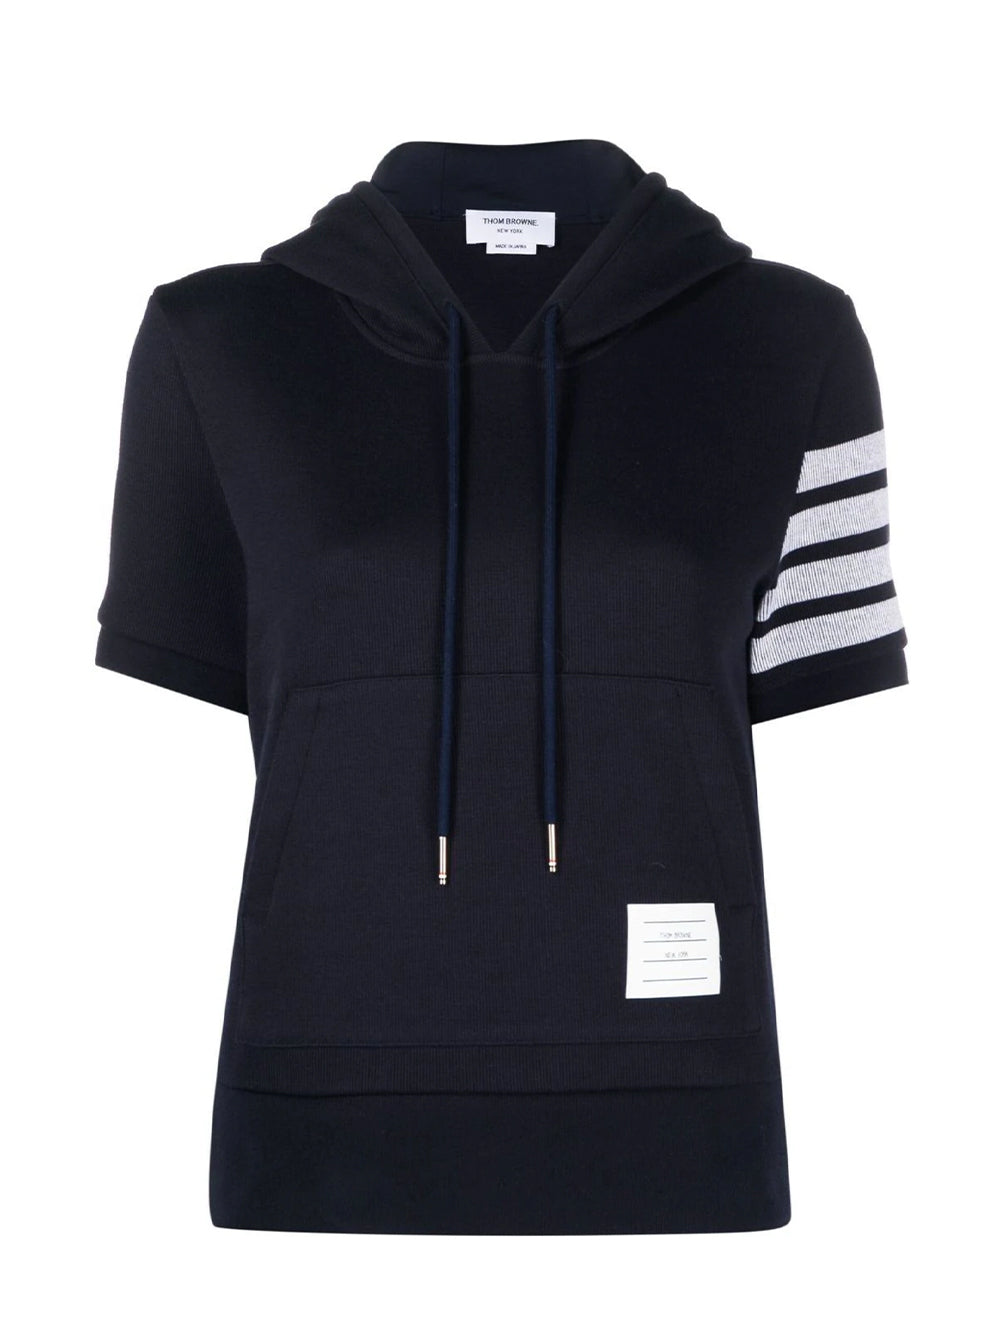 Double Face Knit 4-Bar Short Sleeve Hoodie